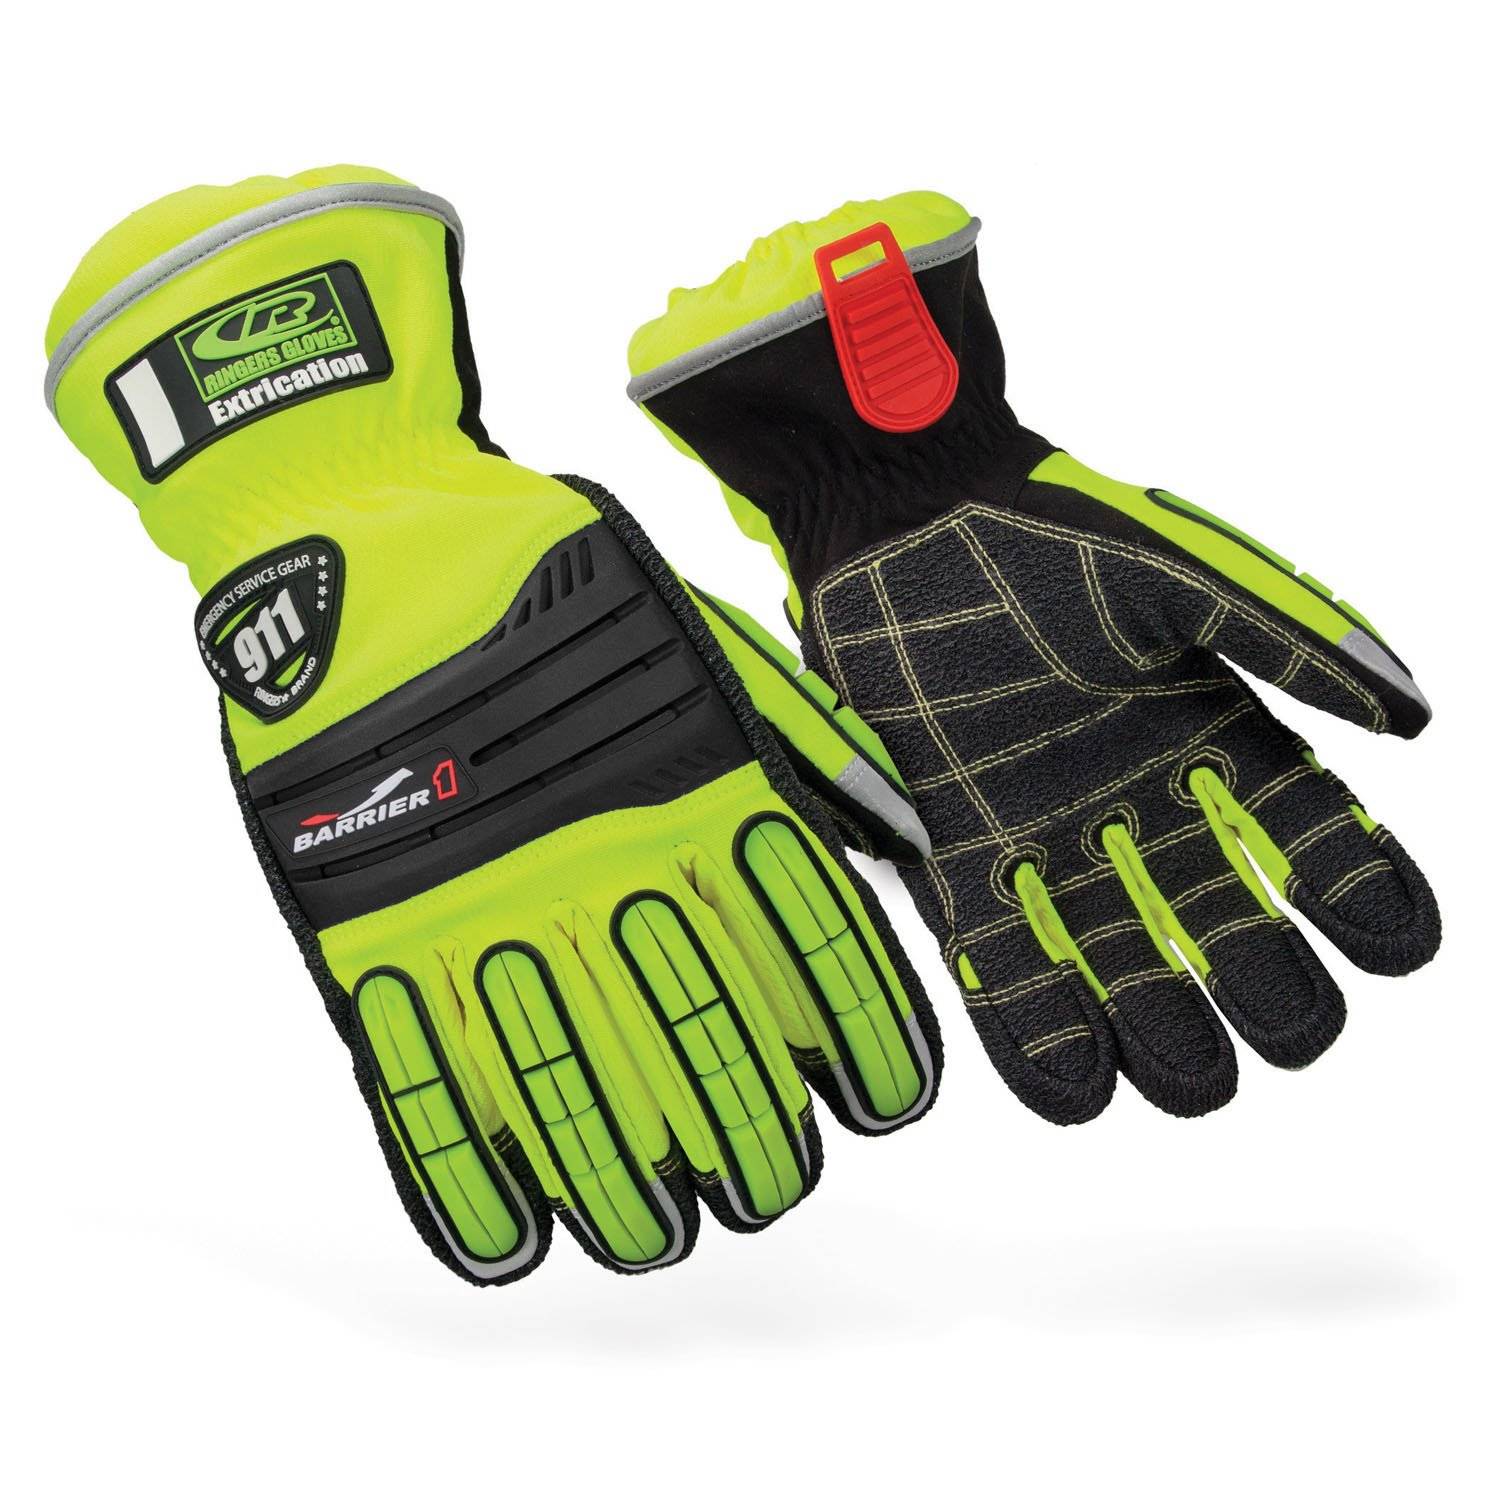 Ringers Barrier I Extrication Gloves